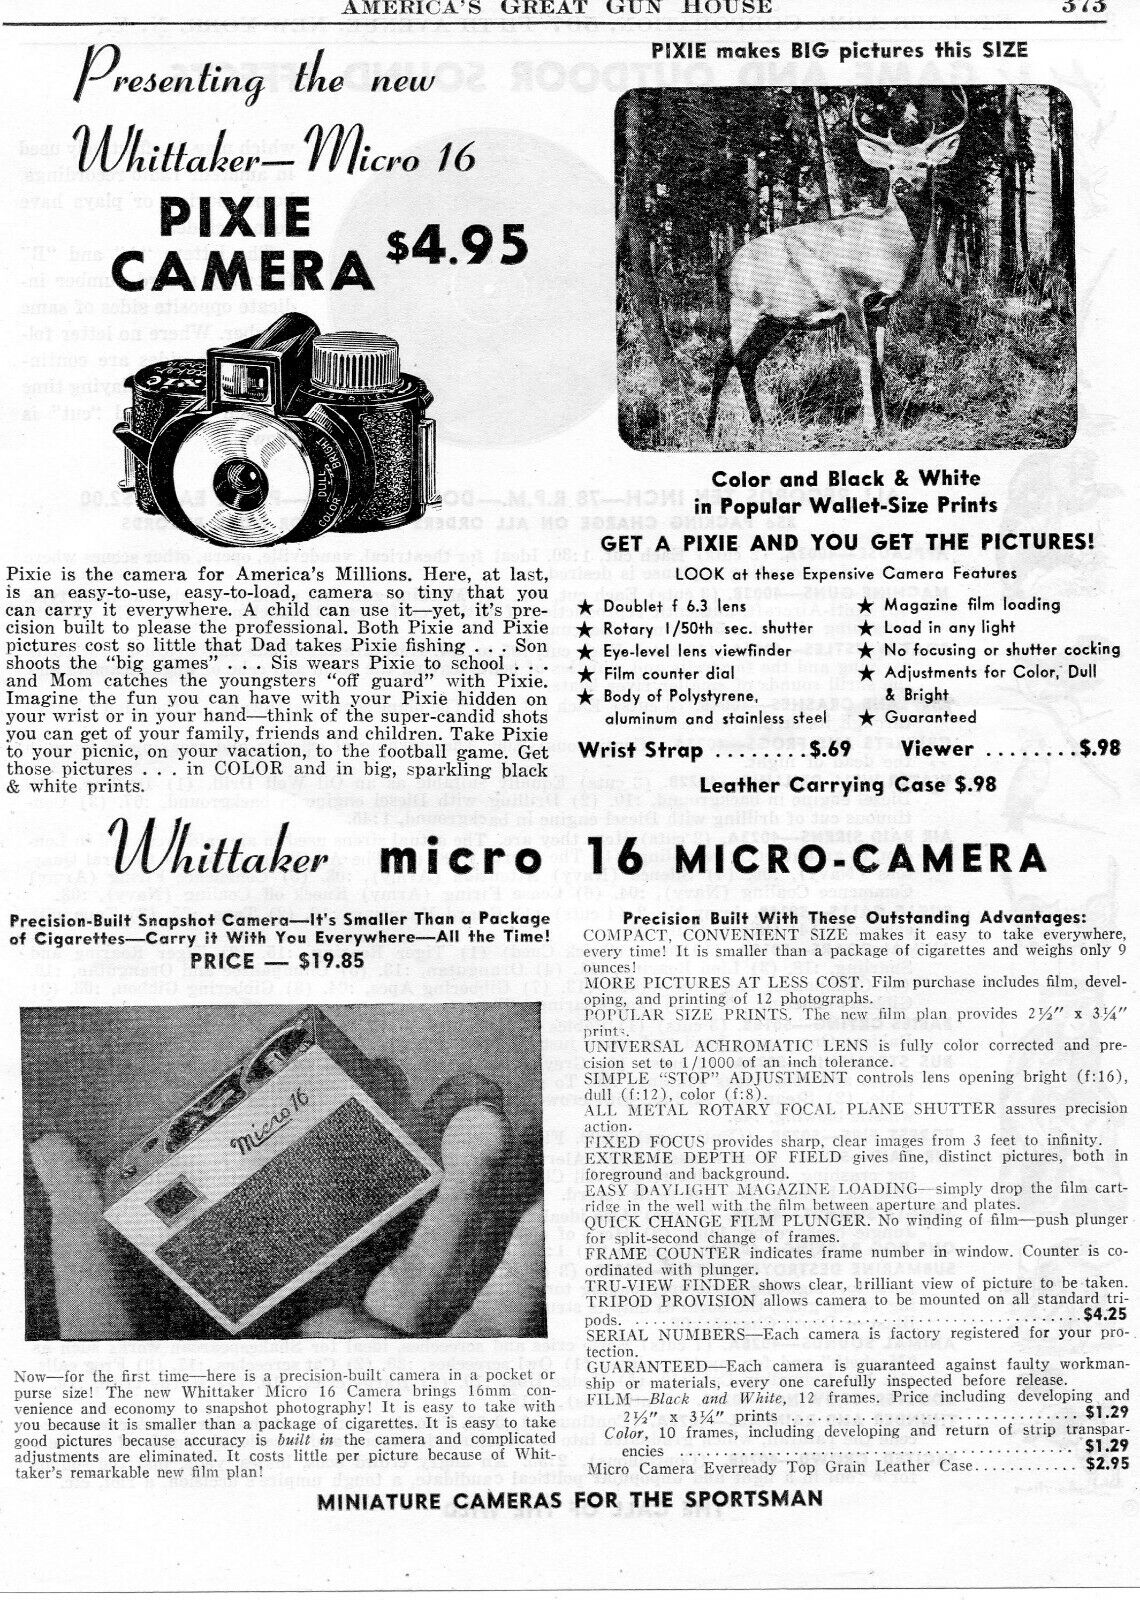 1950 Print Ad of Whittaker Micro 16 Pixie Camera